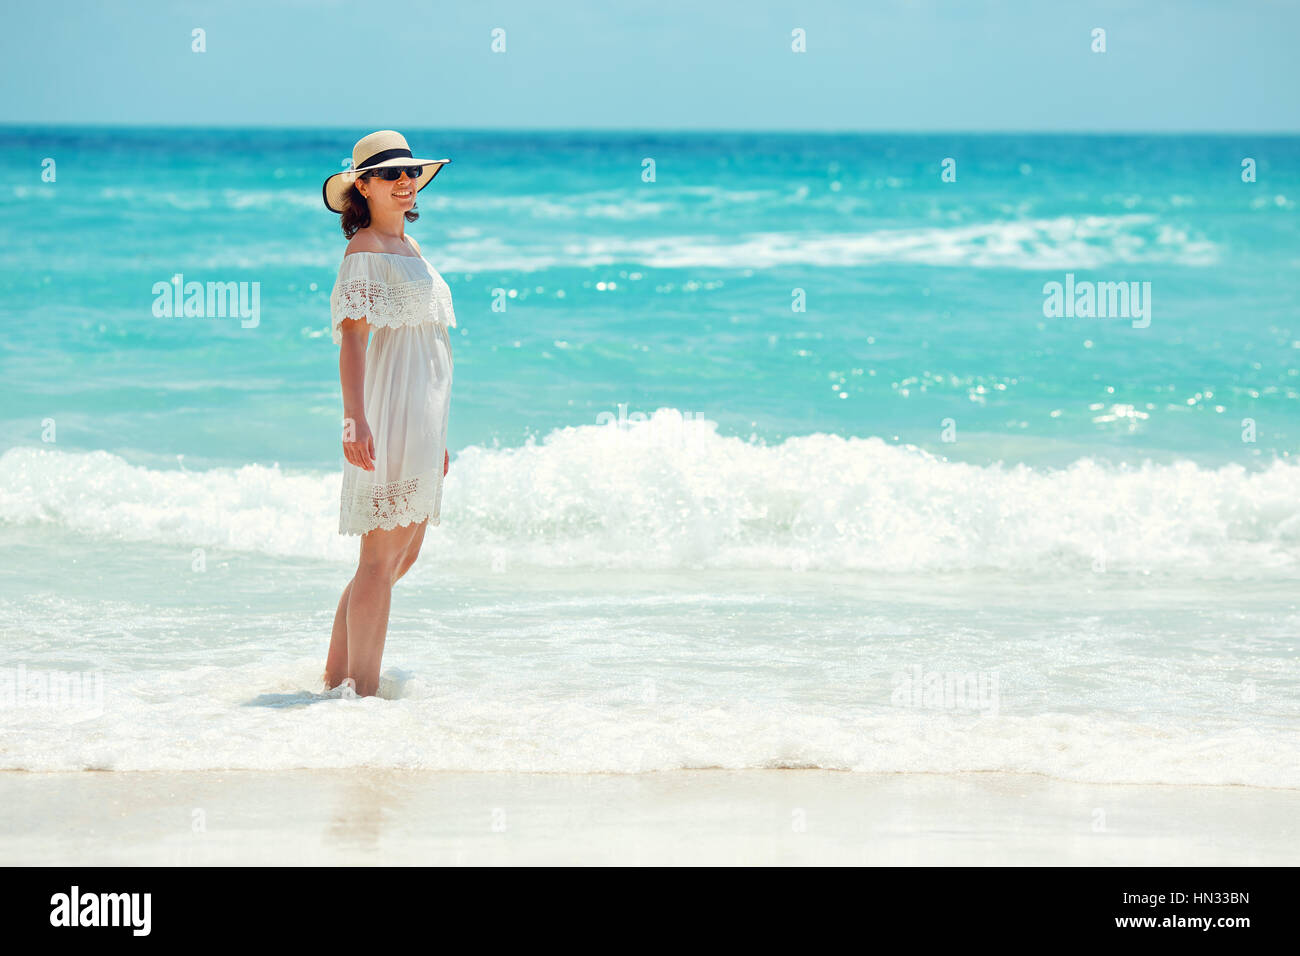 Woman in white dress walking on the beach during summer vacation Stock Photo